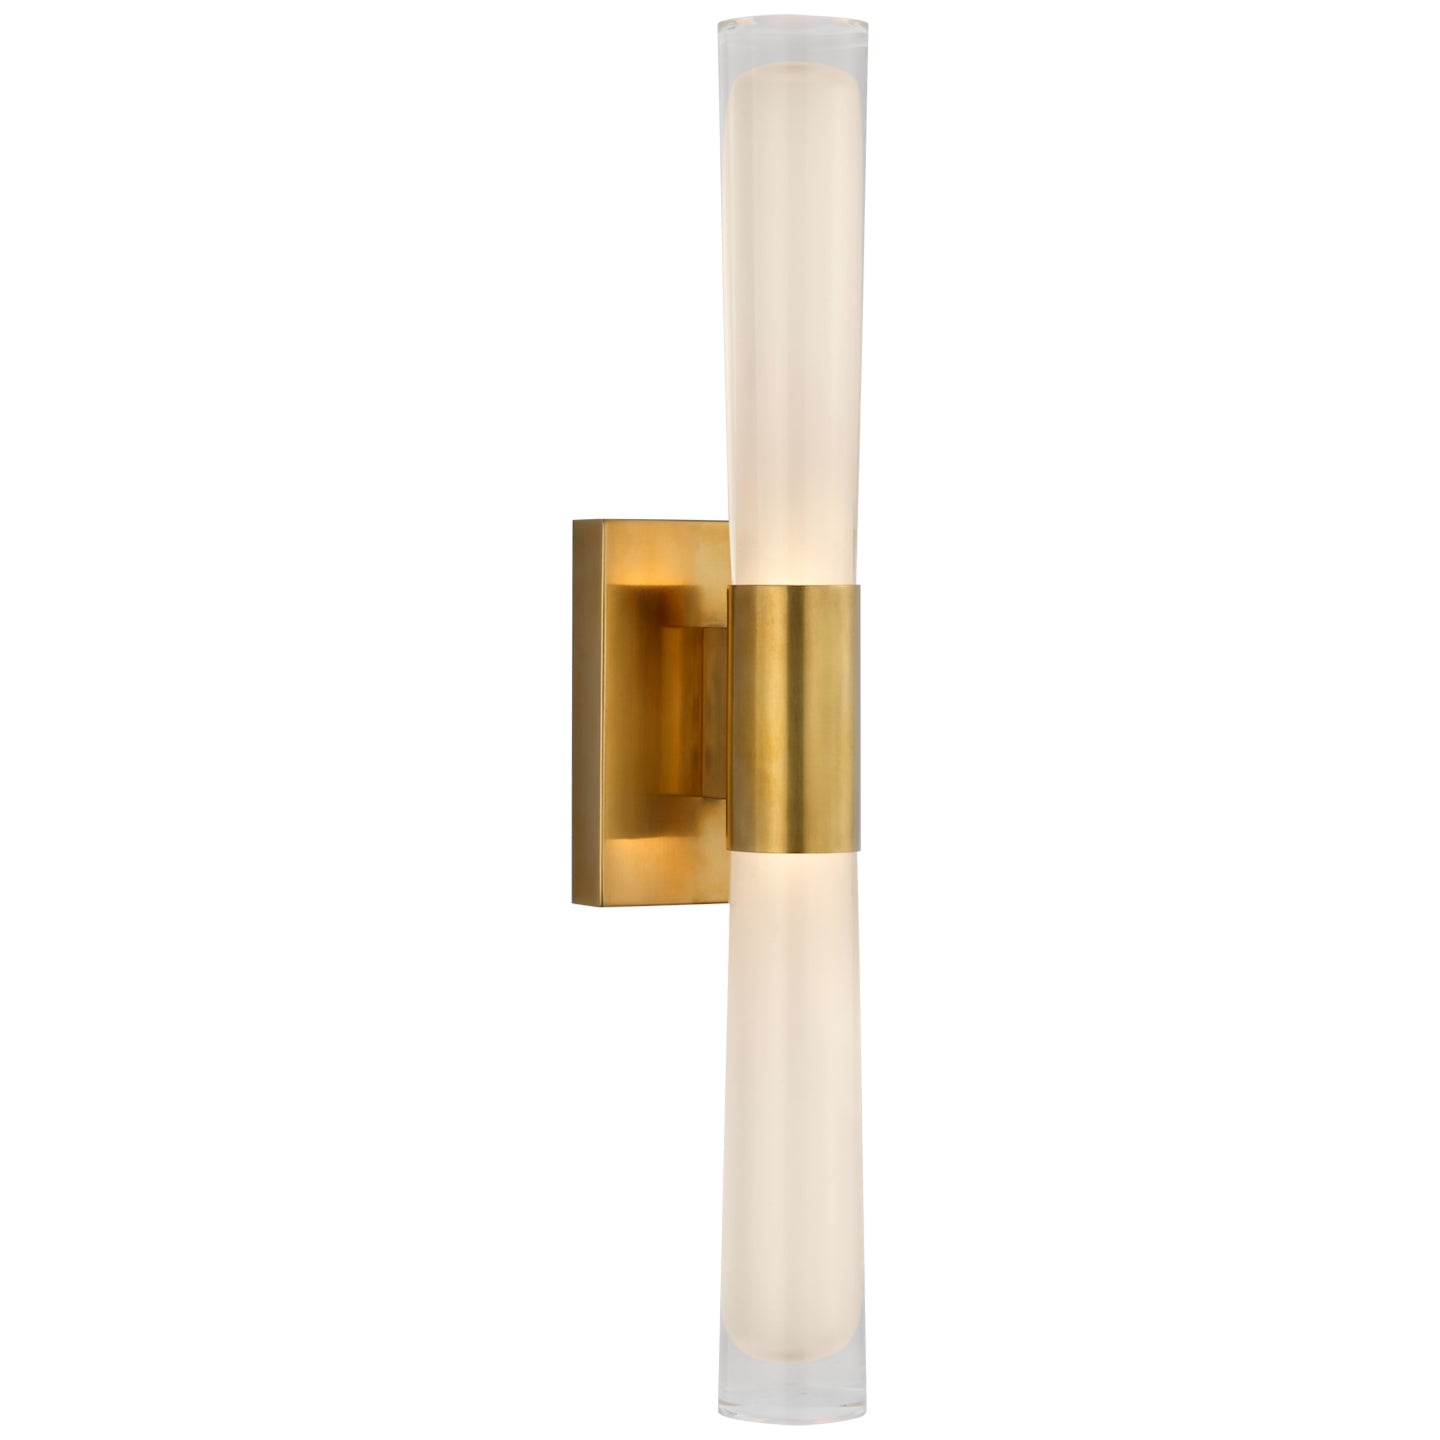 Load image into Gallery viewer, Visual Comfort Signature - ARN 2473HAB-CG - LED Wall Sconce - Brenta - Hand-Rubbed Antique Brass
